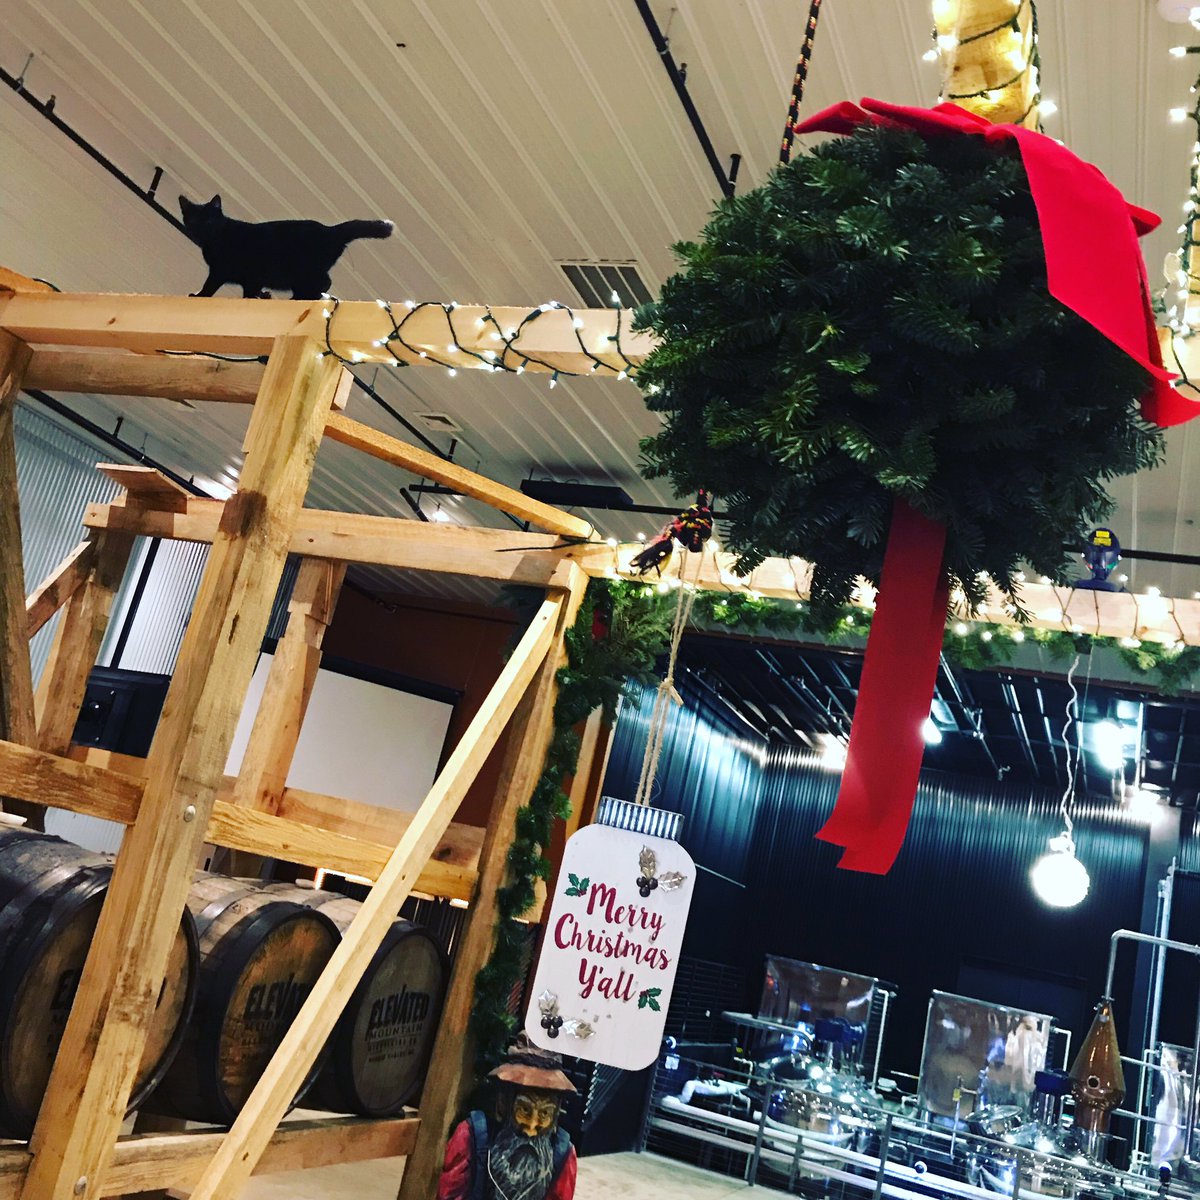 It’s #Caturday at the #distillery and #elliemei is exploring our #barrel #rack #elevatedmtn #merrychristmas